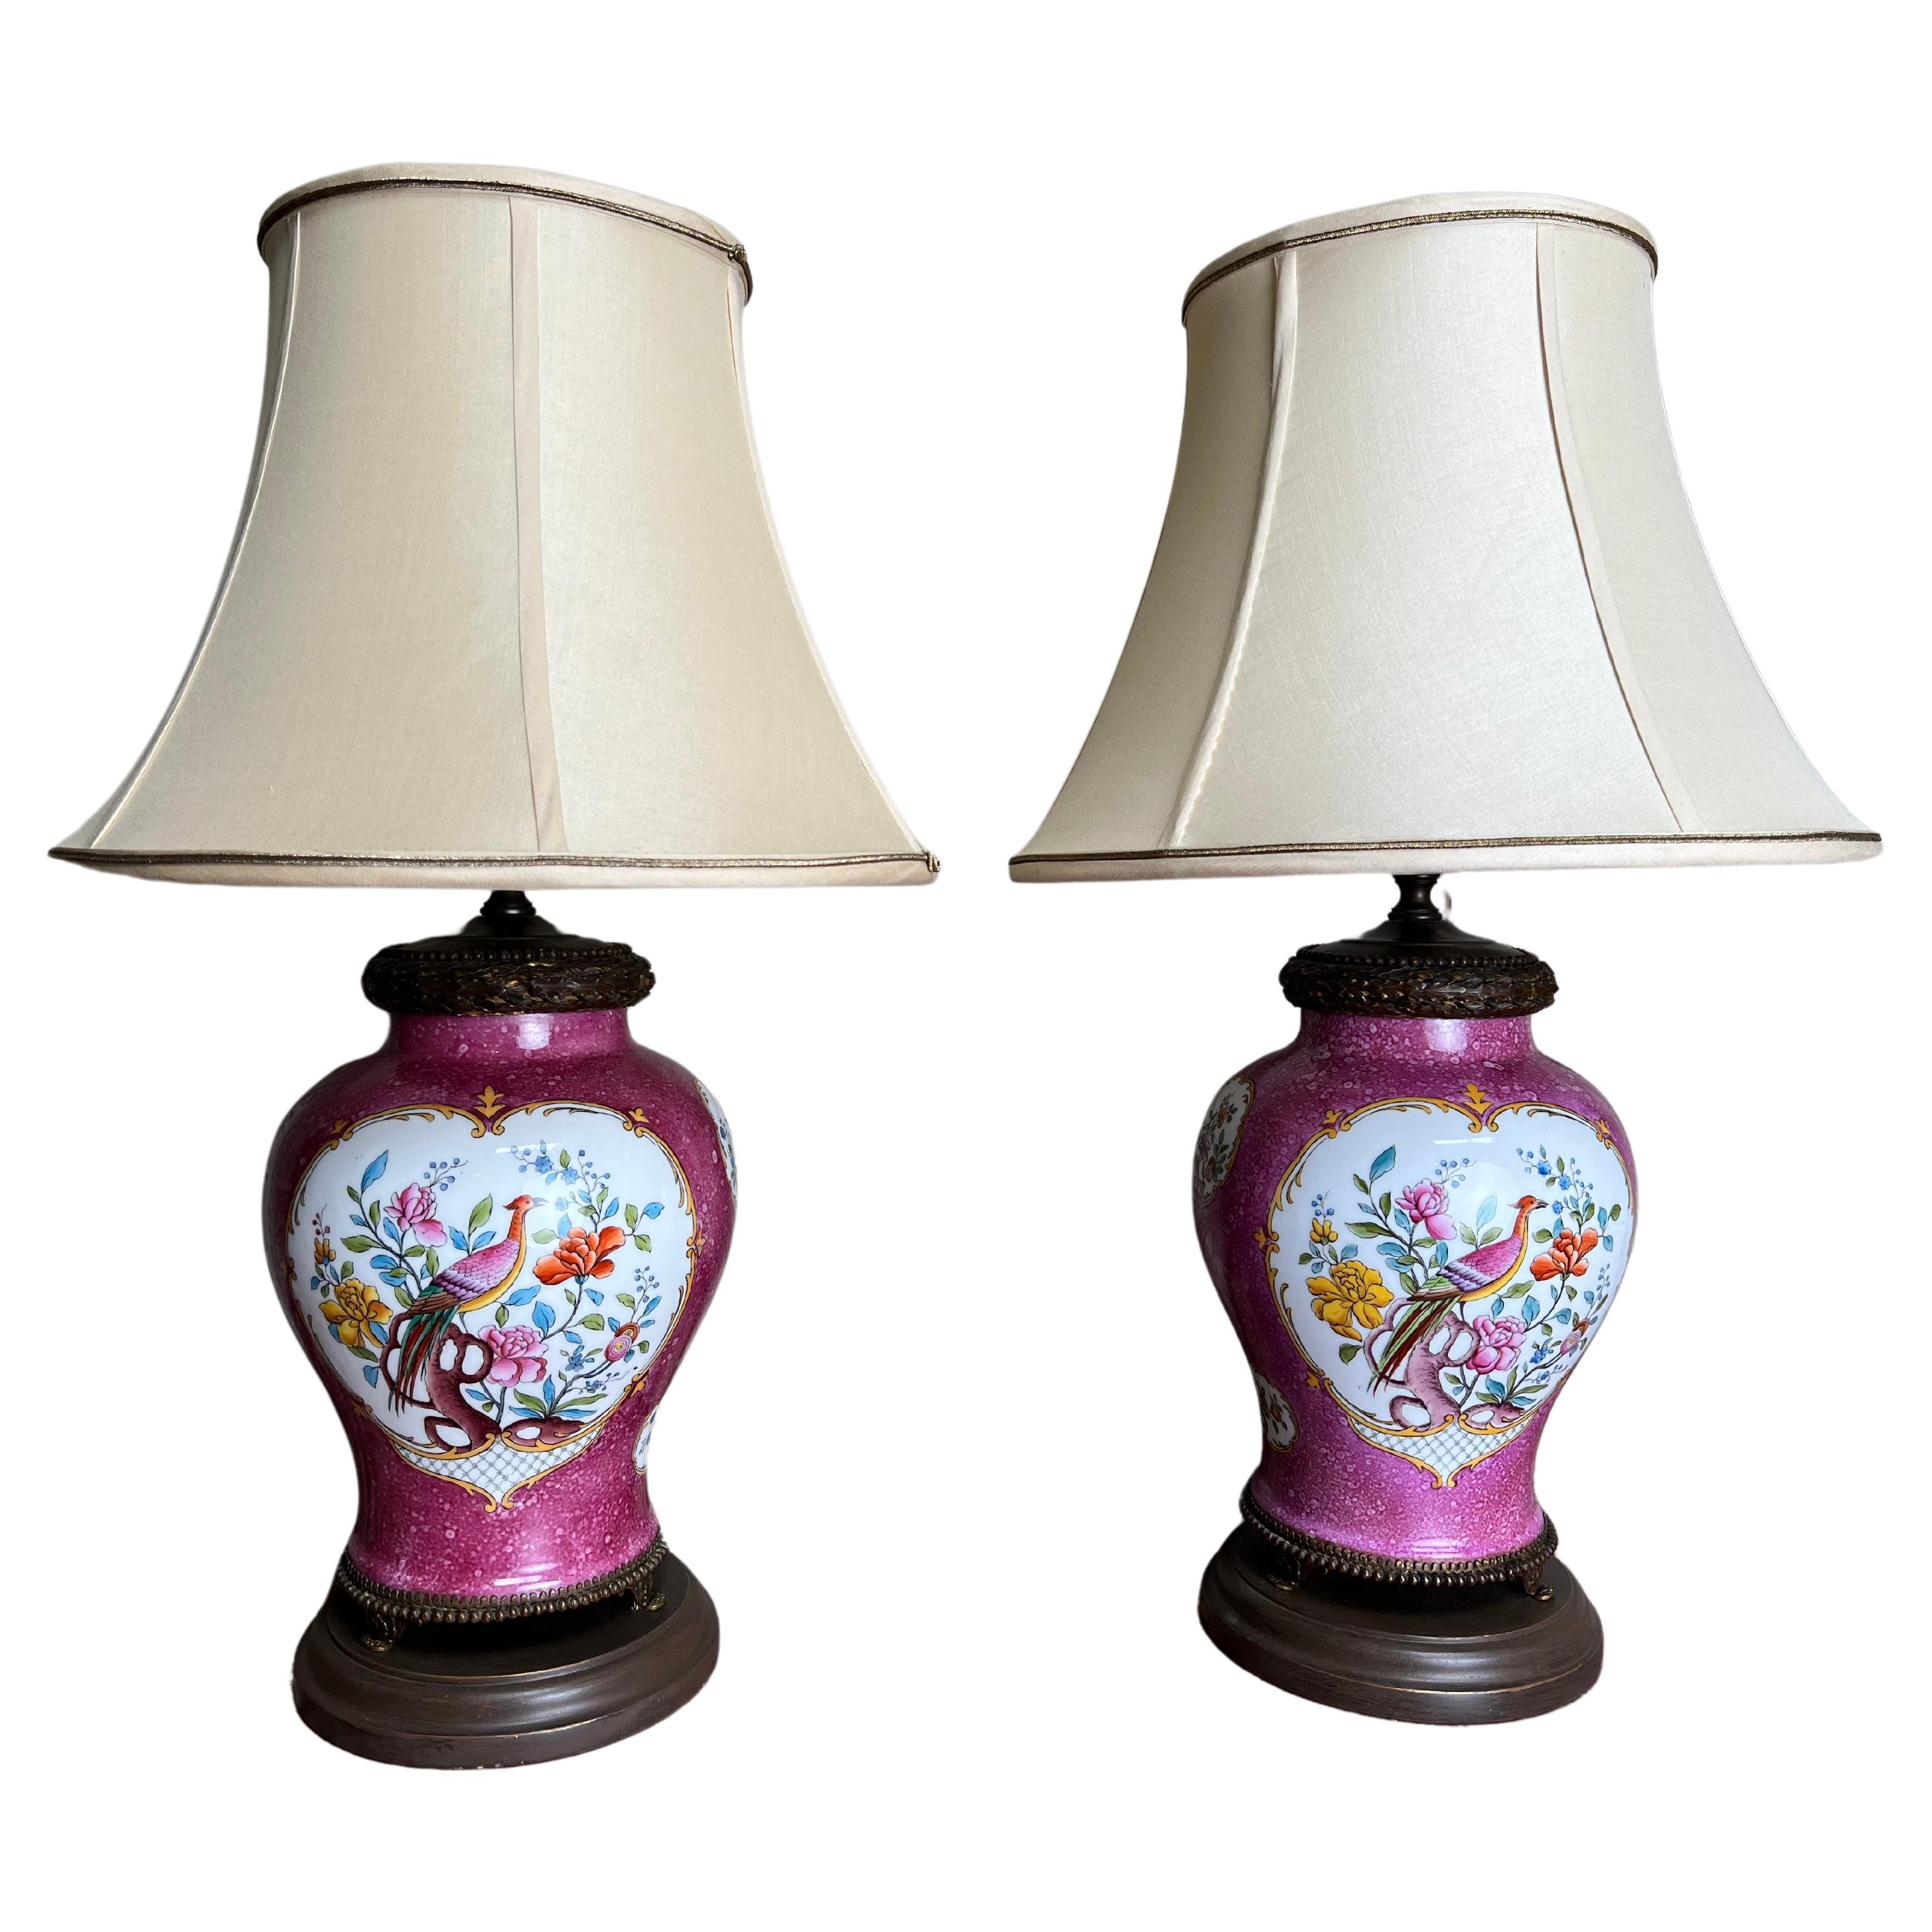 Pair of Pink Porcelain Lamps With Enameled Birds and Flowers For Sale